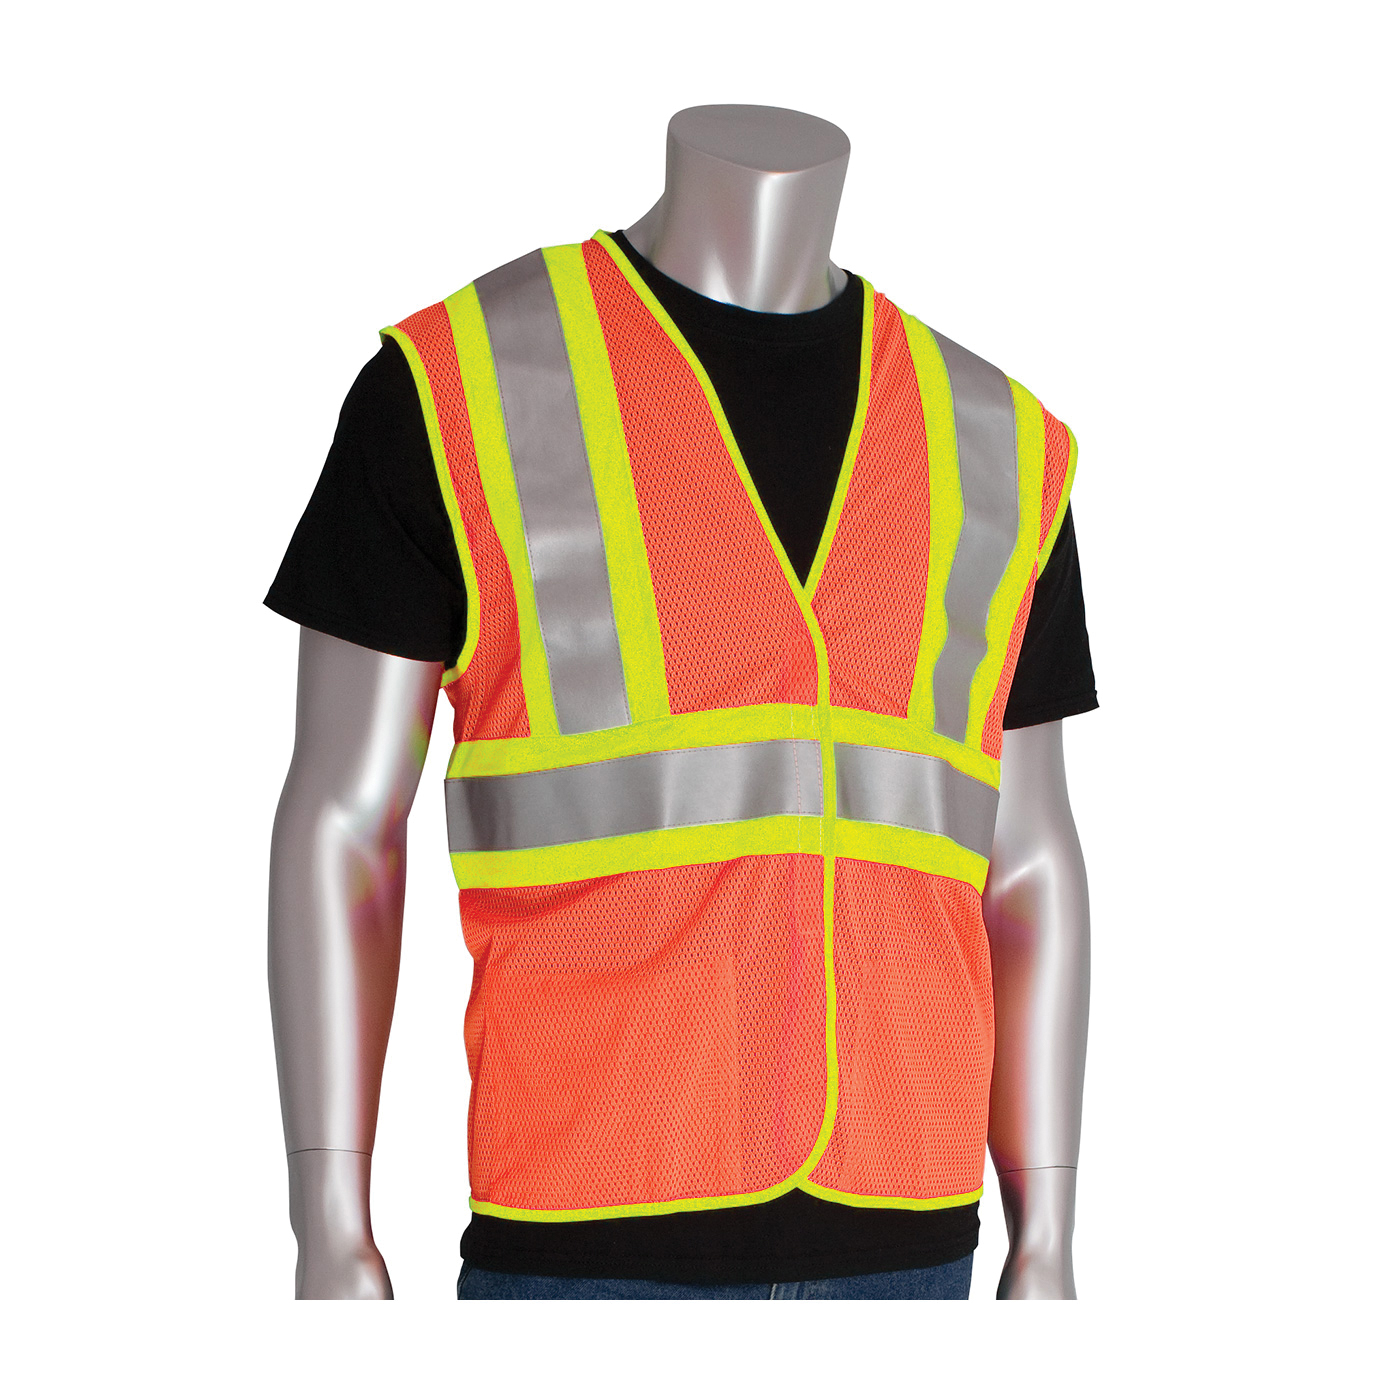 PIP® 305-MVFROR-2X/3X 2-Tone FR Treated Safety Vest, 2XL/3XL, Hi-Viz Orange, Polyester, Hook and Loop Closure, 2 Pockets, ANSI Class: Class 2, Specifications Met: ANSI Specified